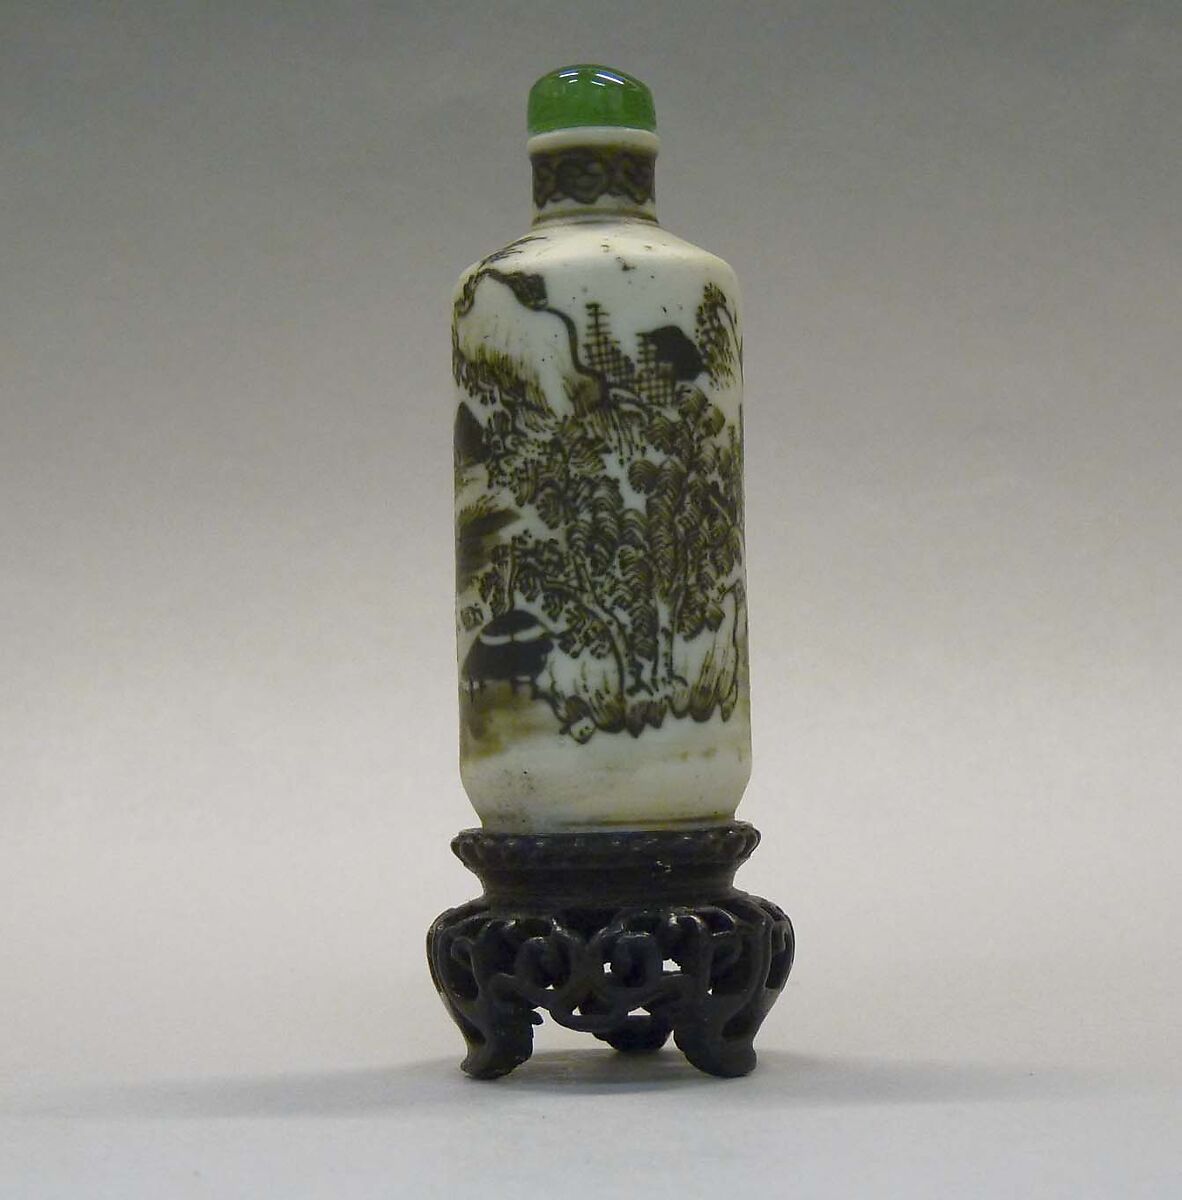 Snuff Bottle, Biscuit porcelain decorated with brown black enamels, green glass stopper, China 